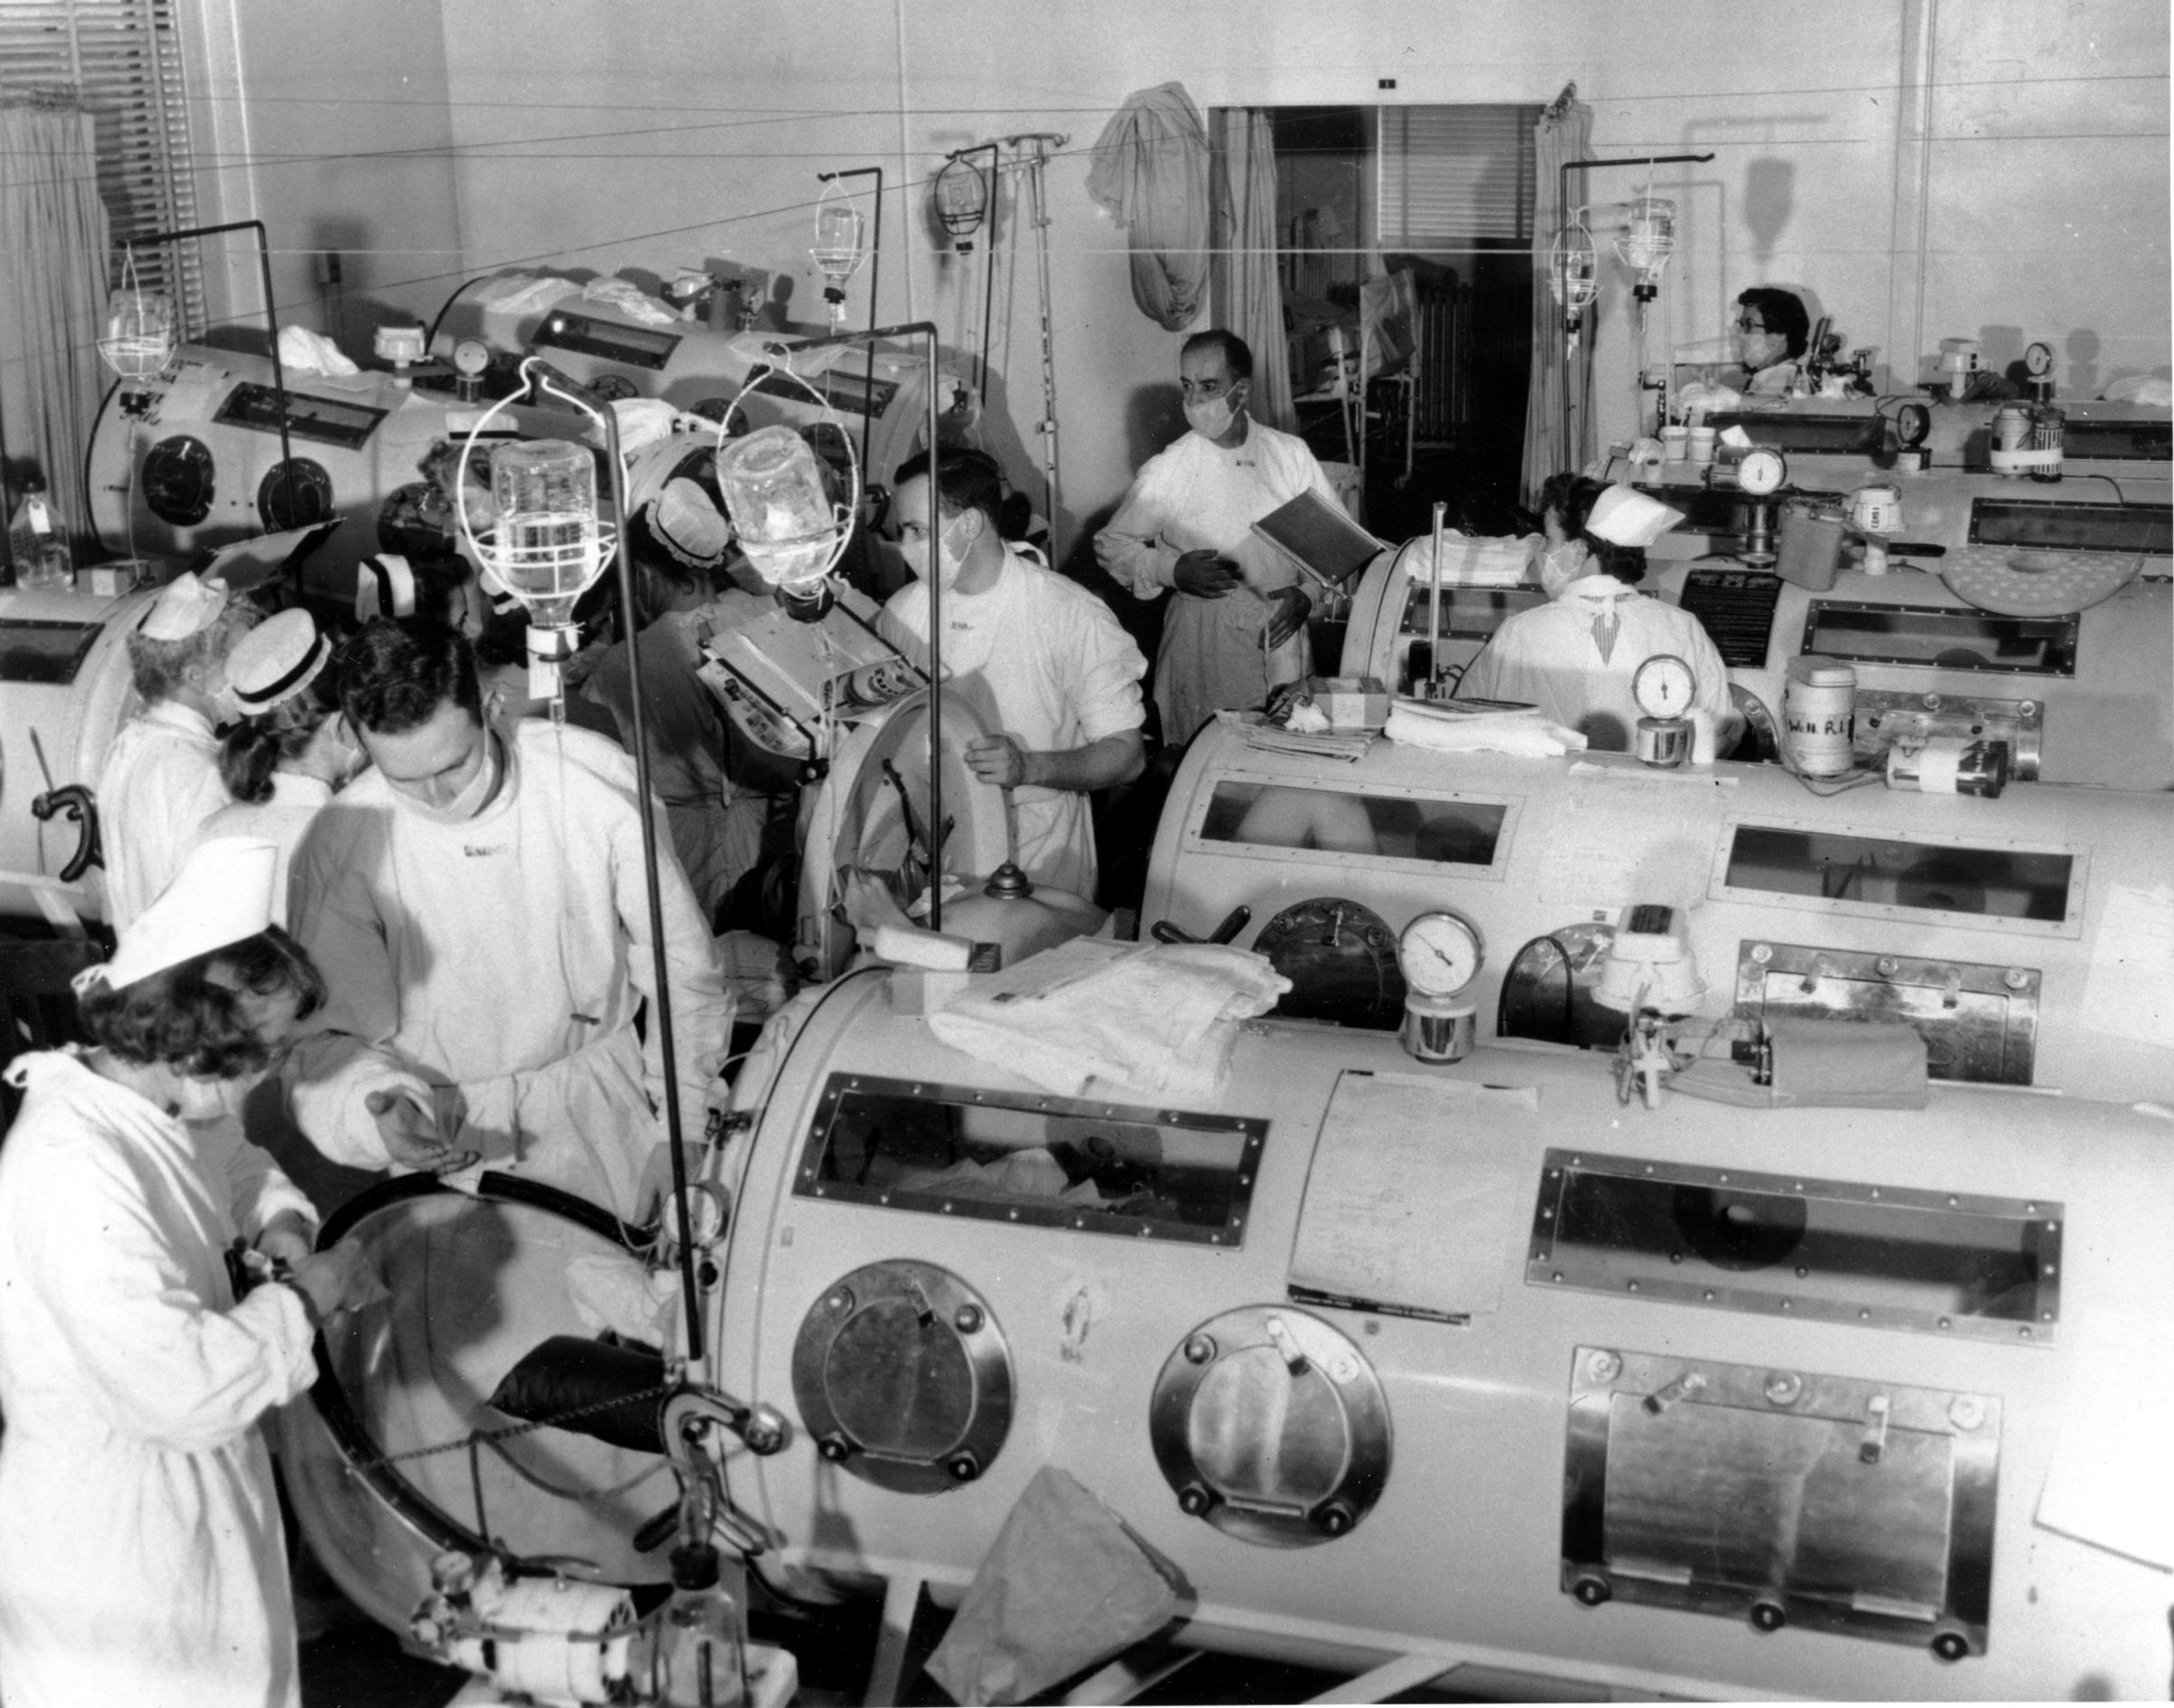 Critical-care patients are lined up close together in iron lung respirators